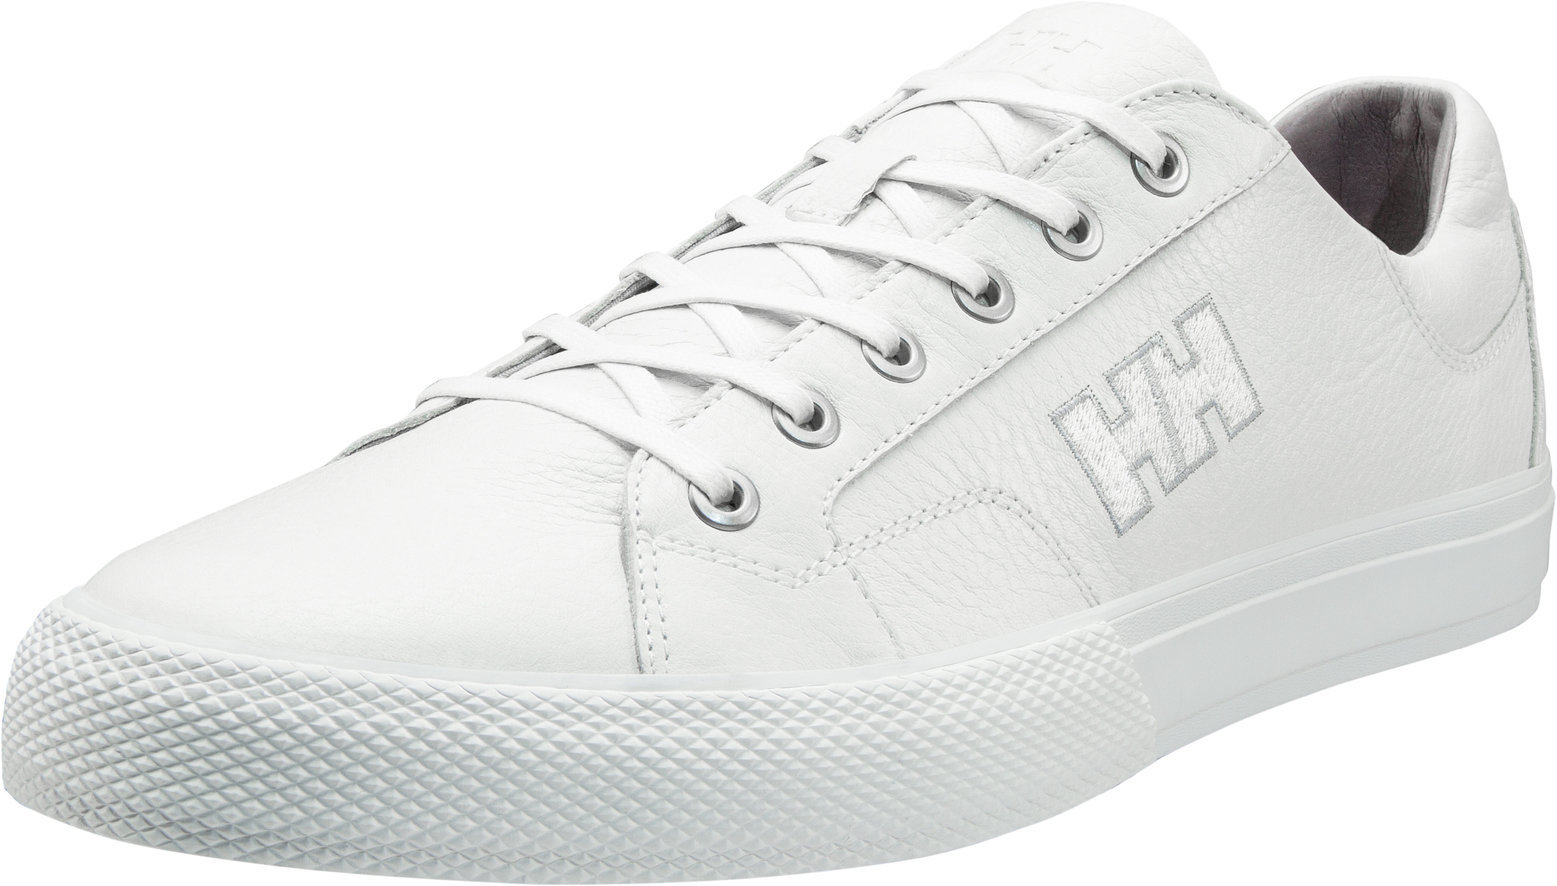 Mens Sailing Shoes Helly Hansen Fjord LV-2 Off White - 42.5